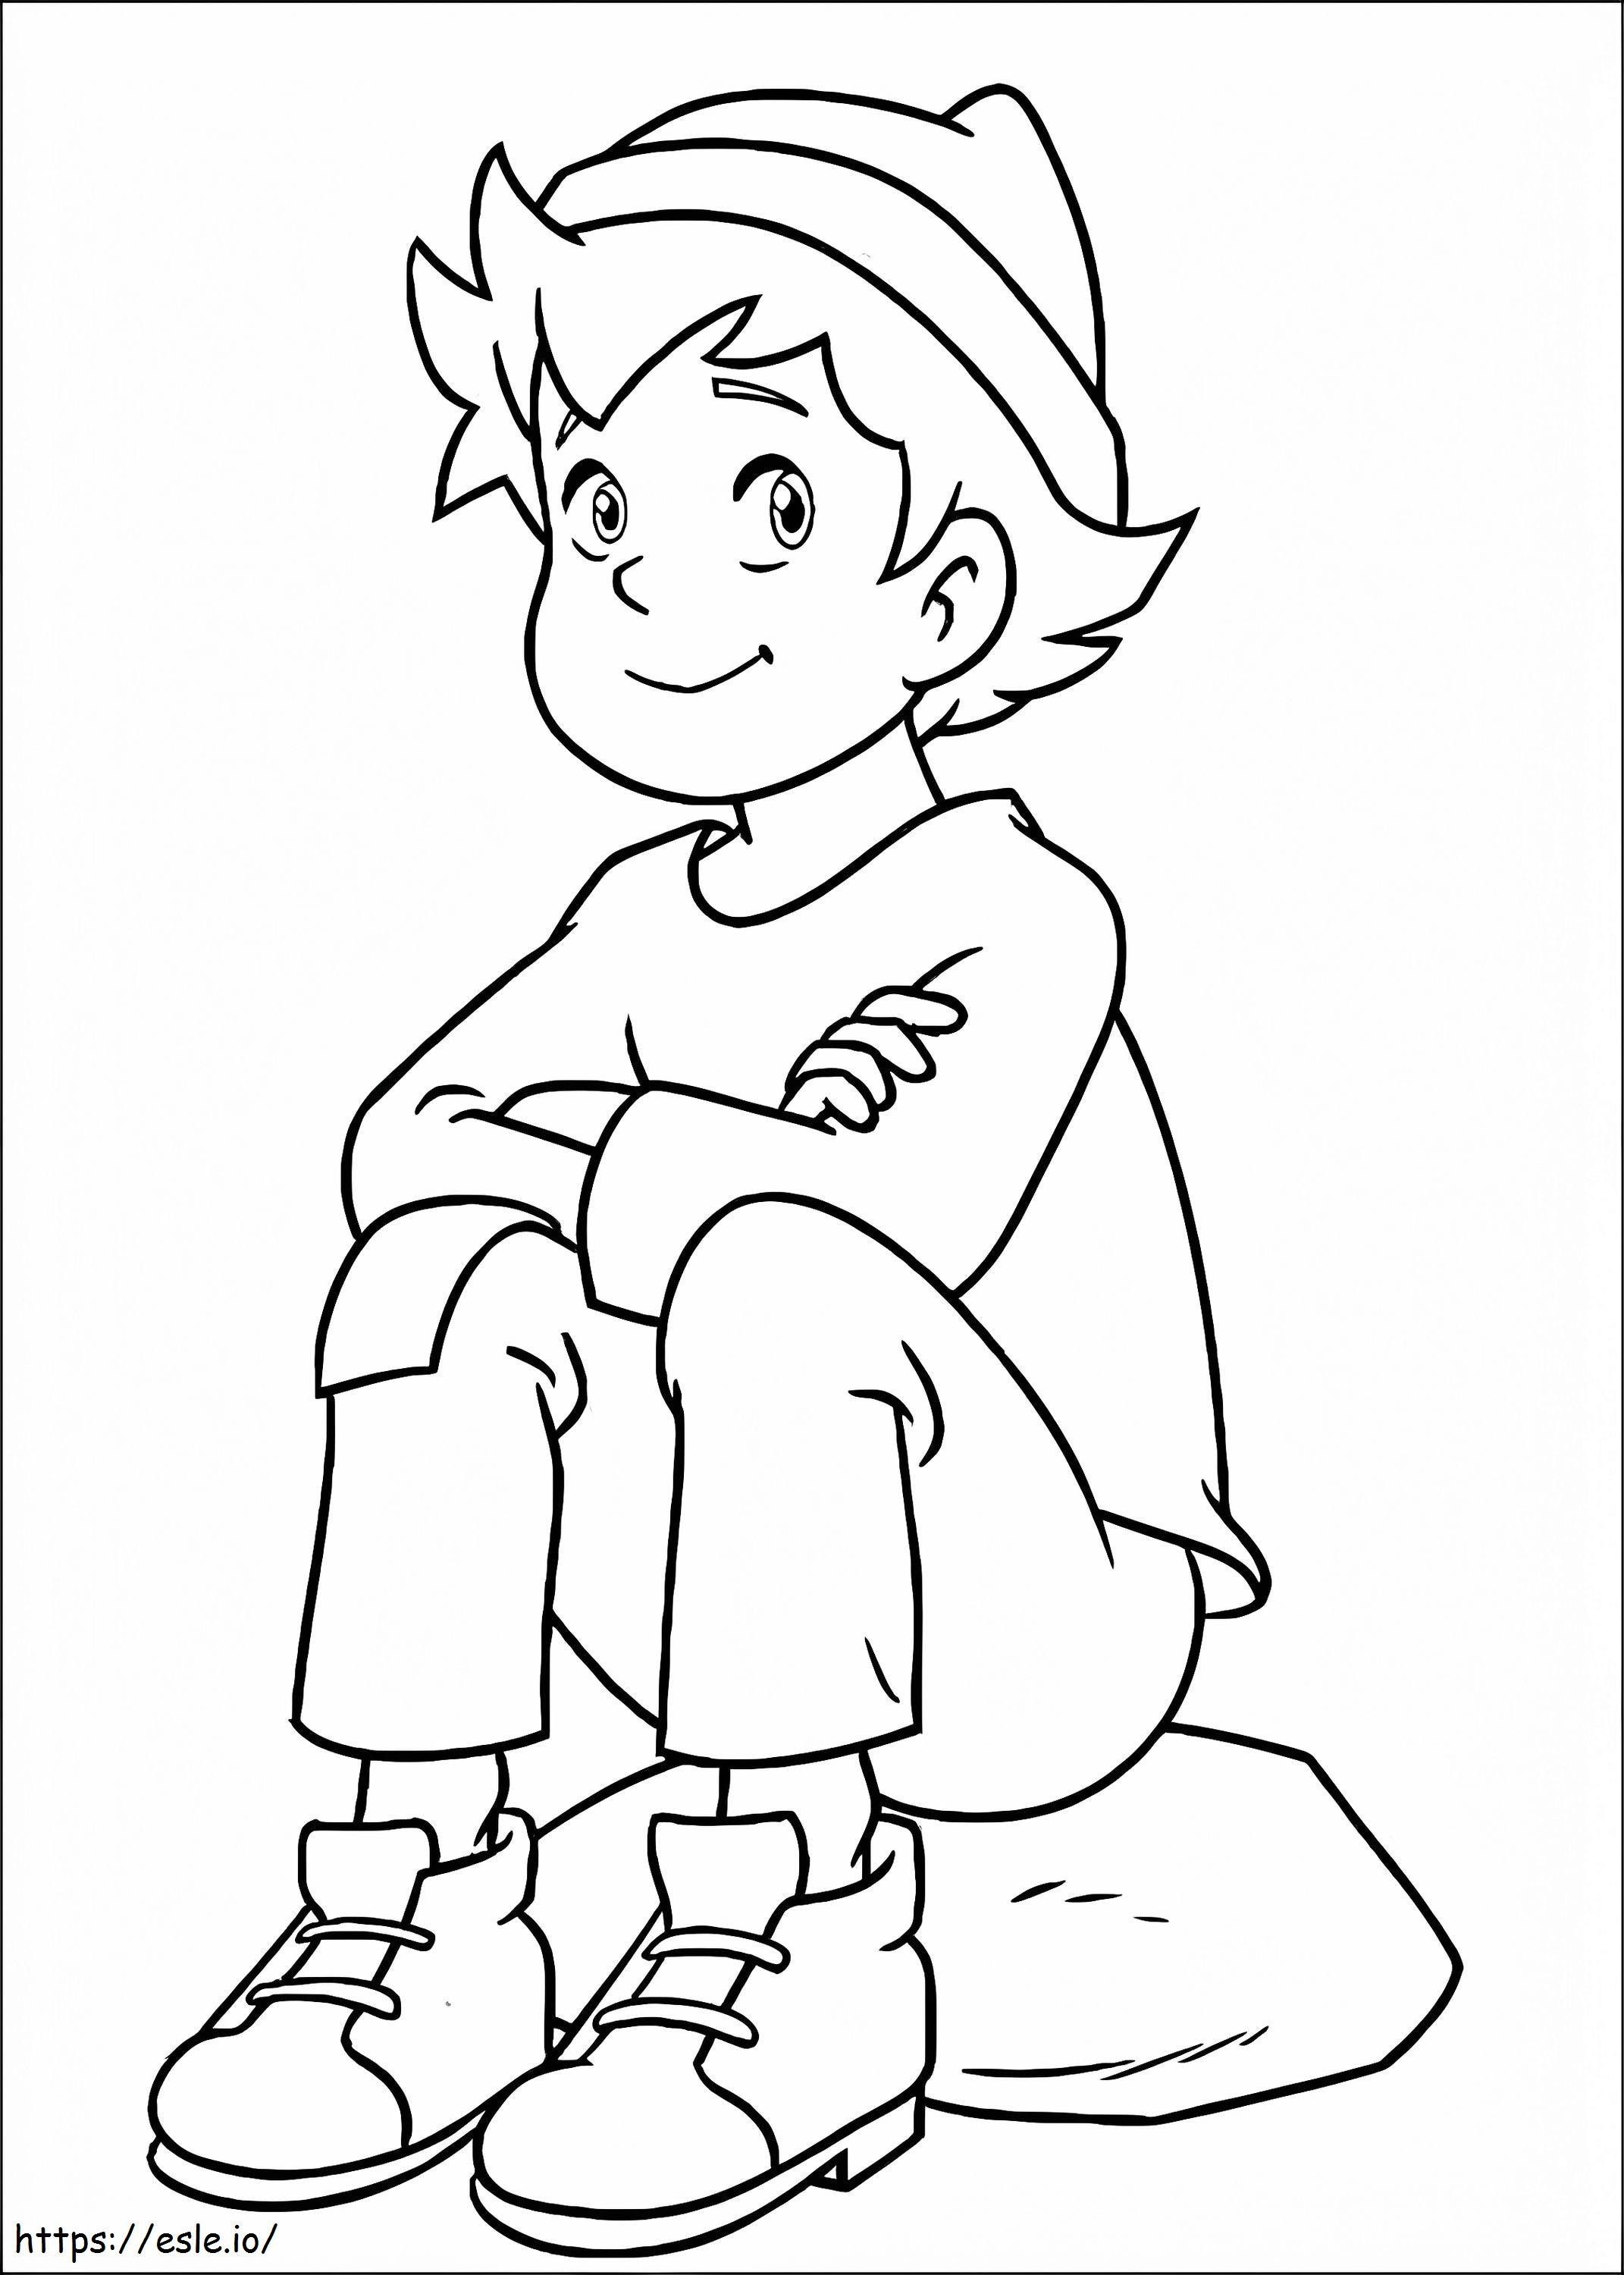 Peter From Heidi coloring page